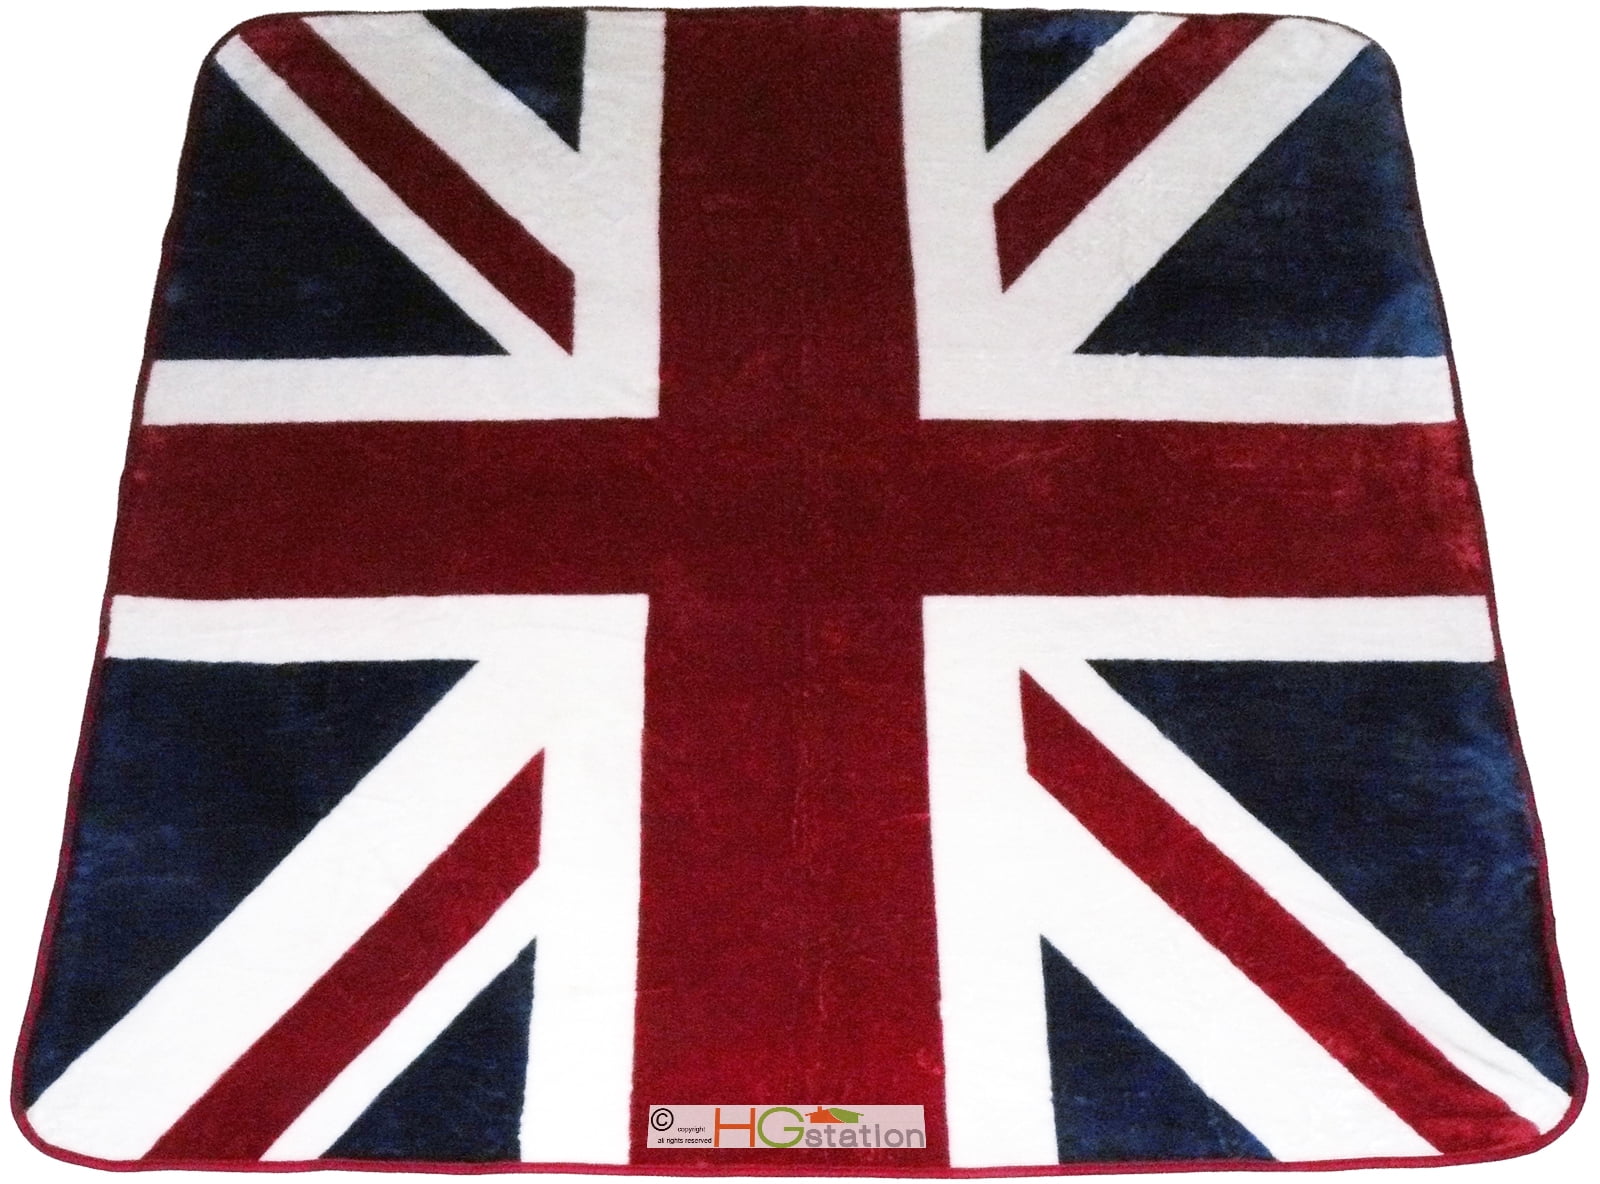 Moslion Soft Cozy Throw Blanket Vintage United Kingdom Union Jack Flag British Flag Fuzzy Couch/Bed Blanket for Adult/Youth Polyester 50 X 60 Inches Home/Travel/Camping Applicable 